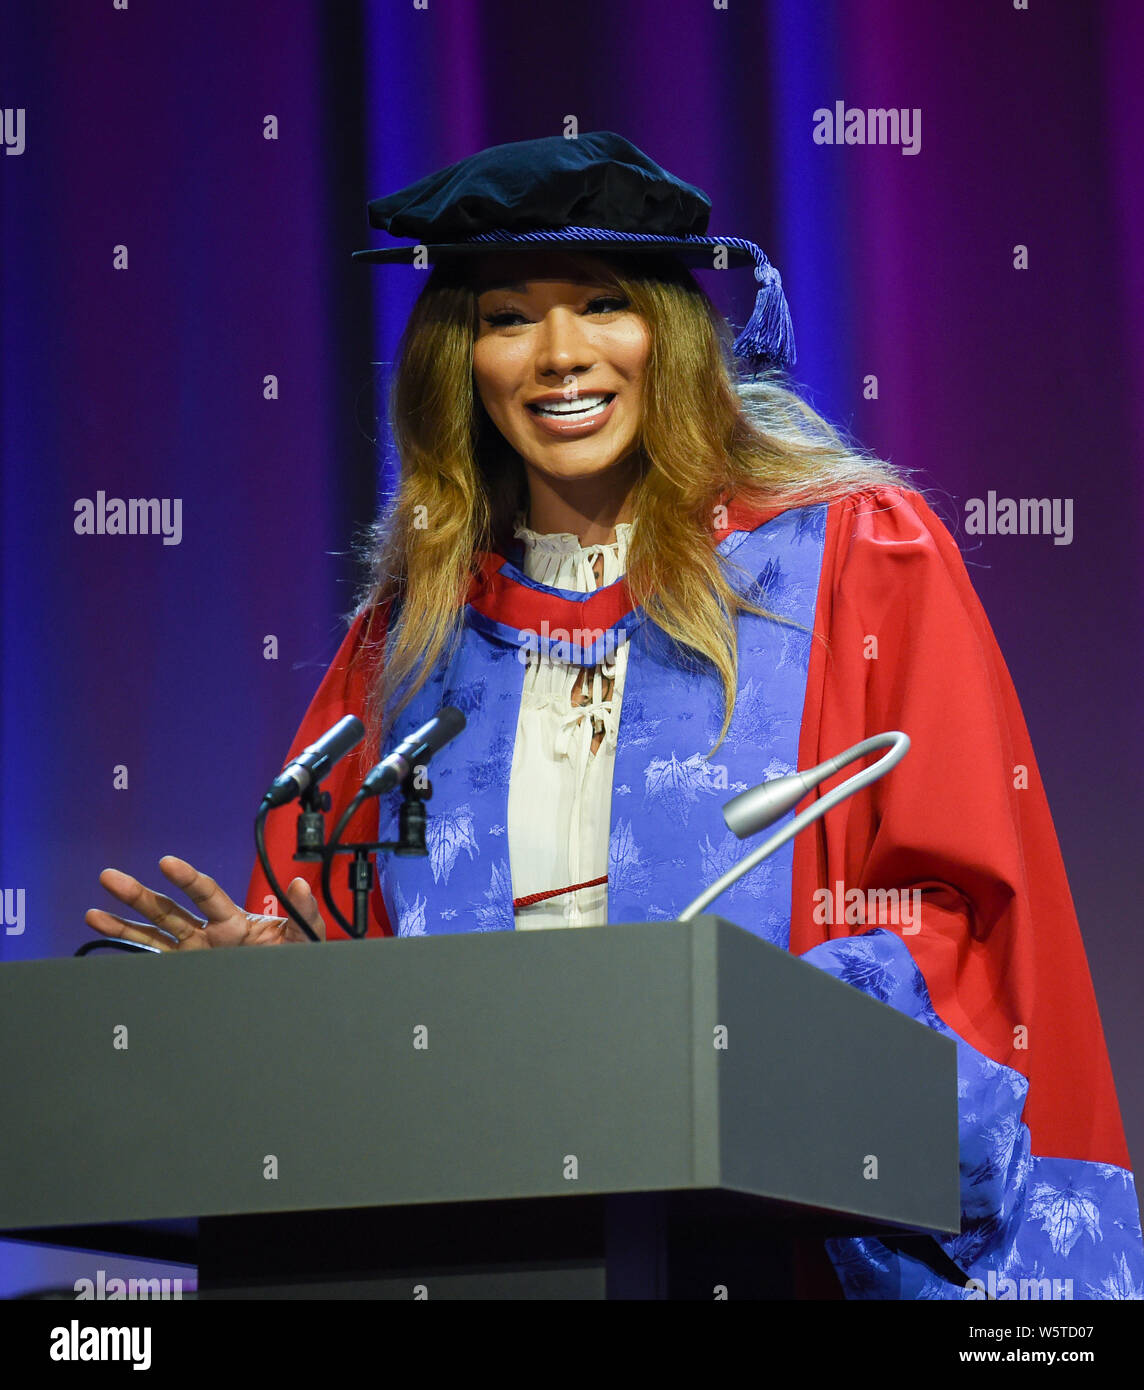 Brighton UK 30th July 2019 - Famous transgender model  Munroe Bergdorf speaking after receiving an honorary doctor of letters at the University of Brighton graduation ceremony today from Vice-Chancellor Professor Debra Humphris . Credit : Simon Dack / Alamy Live News Stock Photo